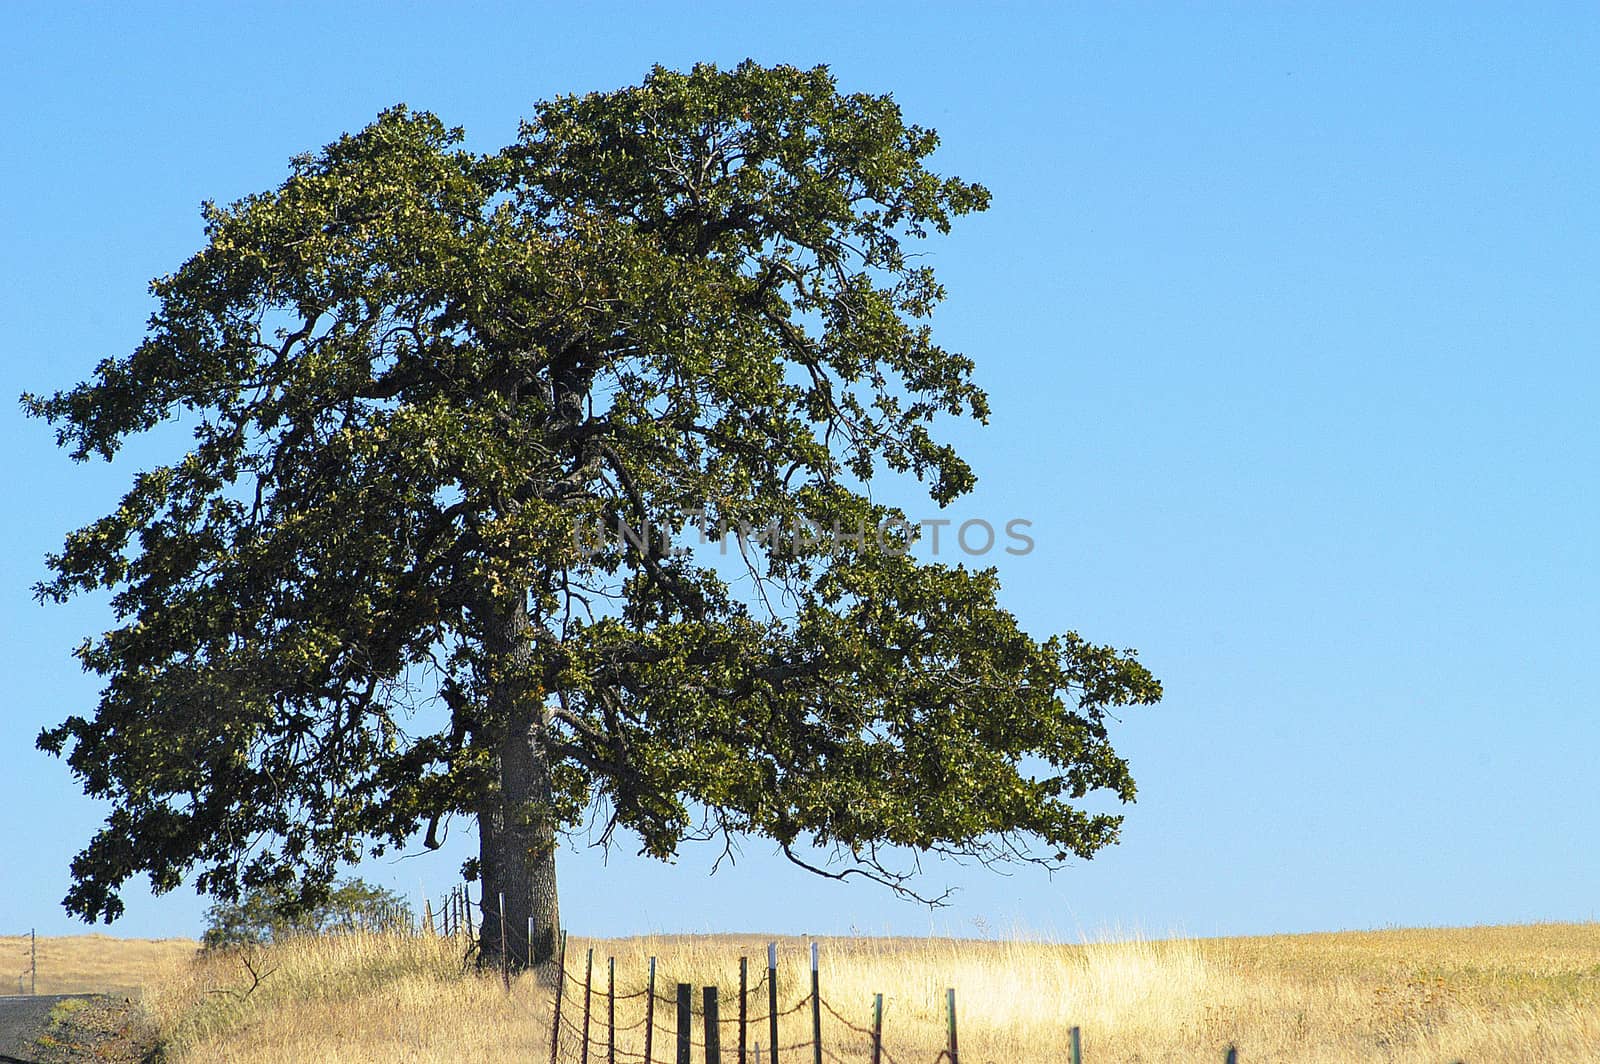 Rural scene in Goldendale, WA at midday with single tree in golden field and clear, blue sky